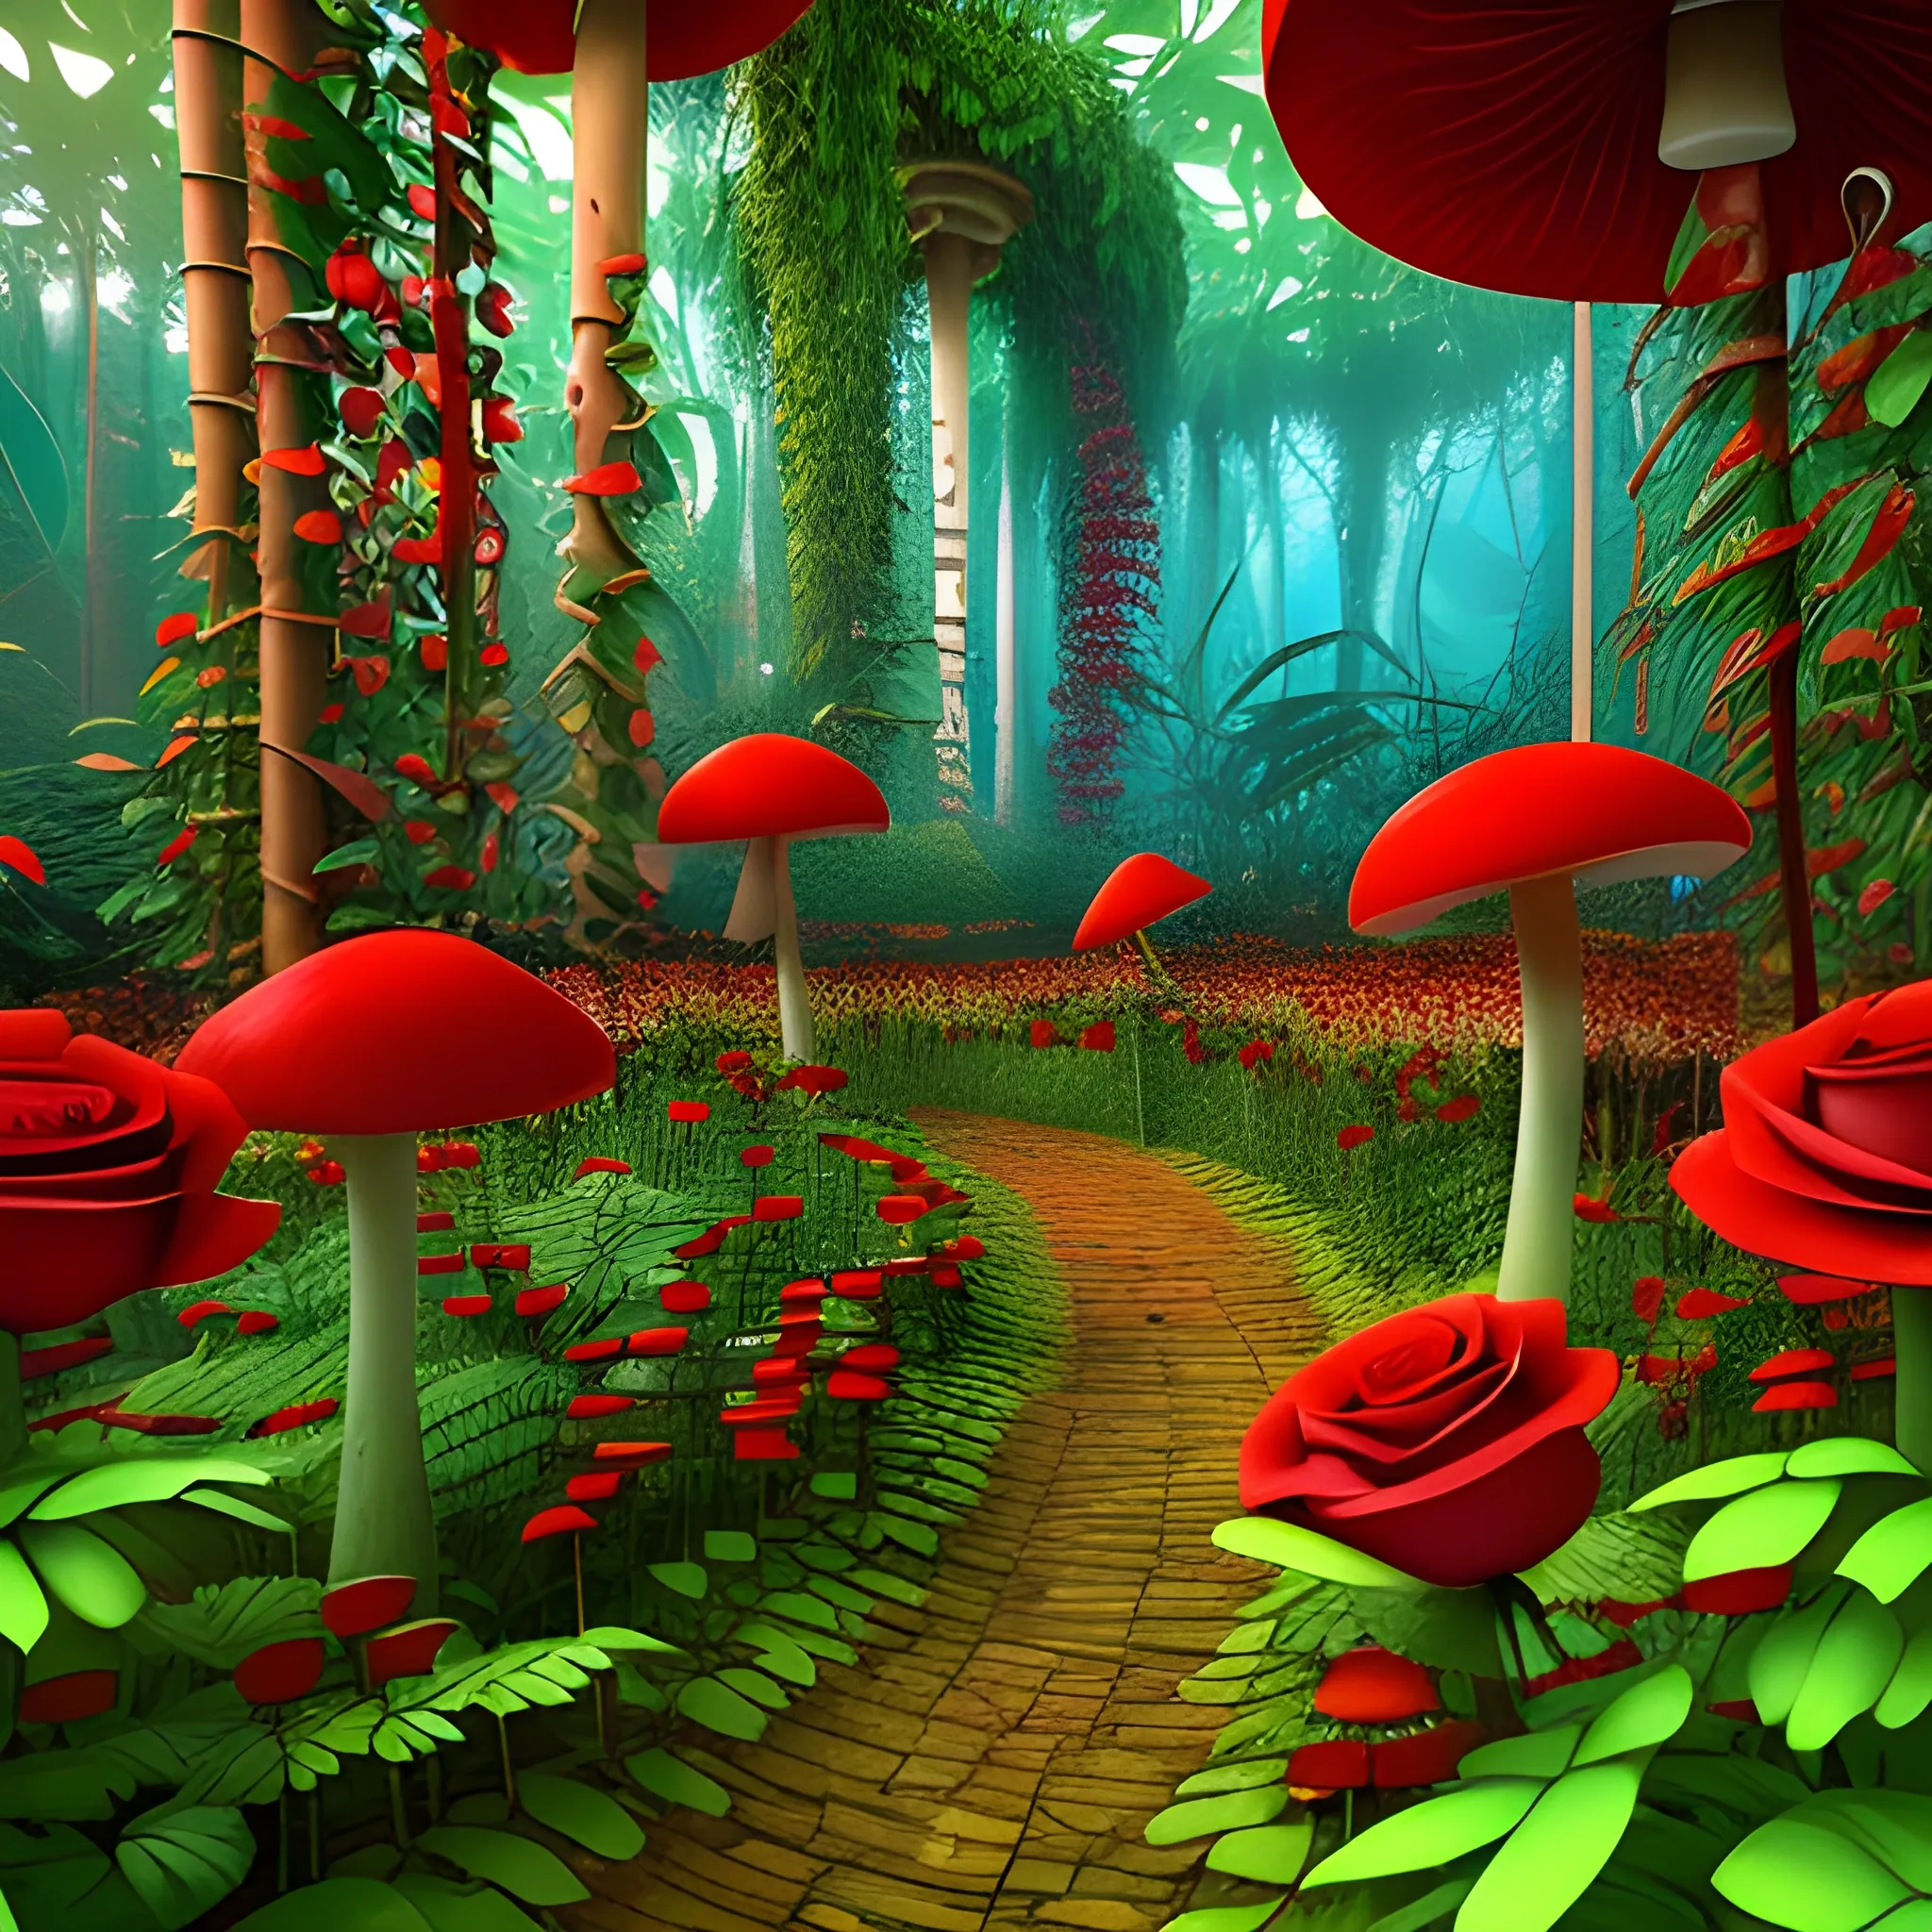 Jungle full of red roses, and flowers of the different colors and mushrooms, 3D